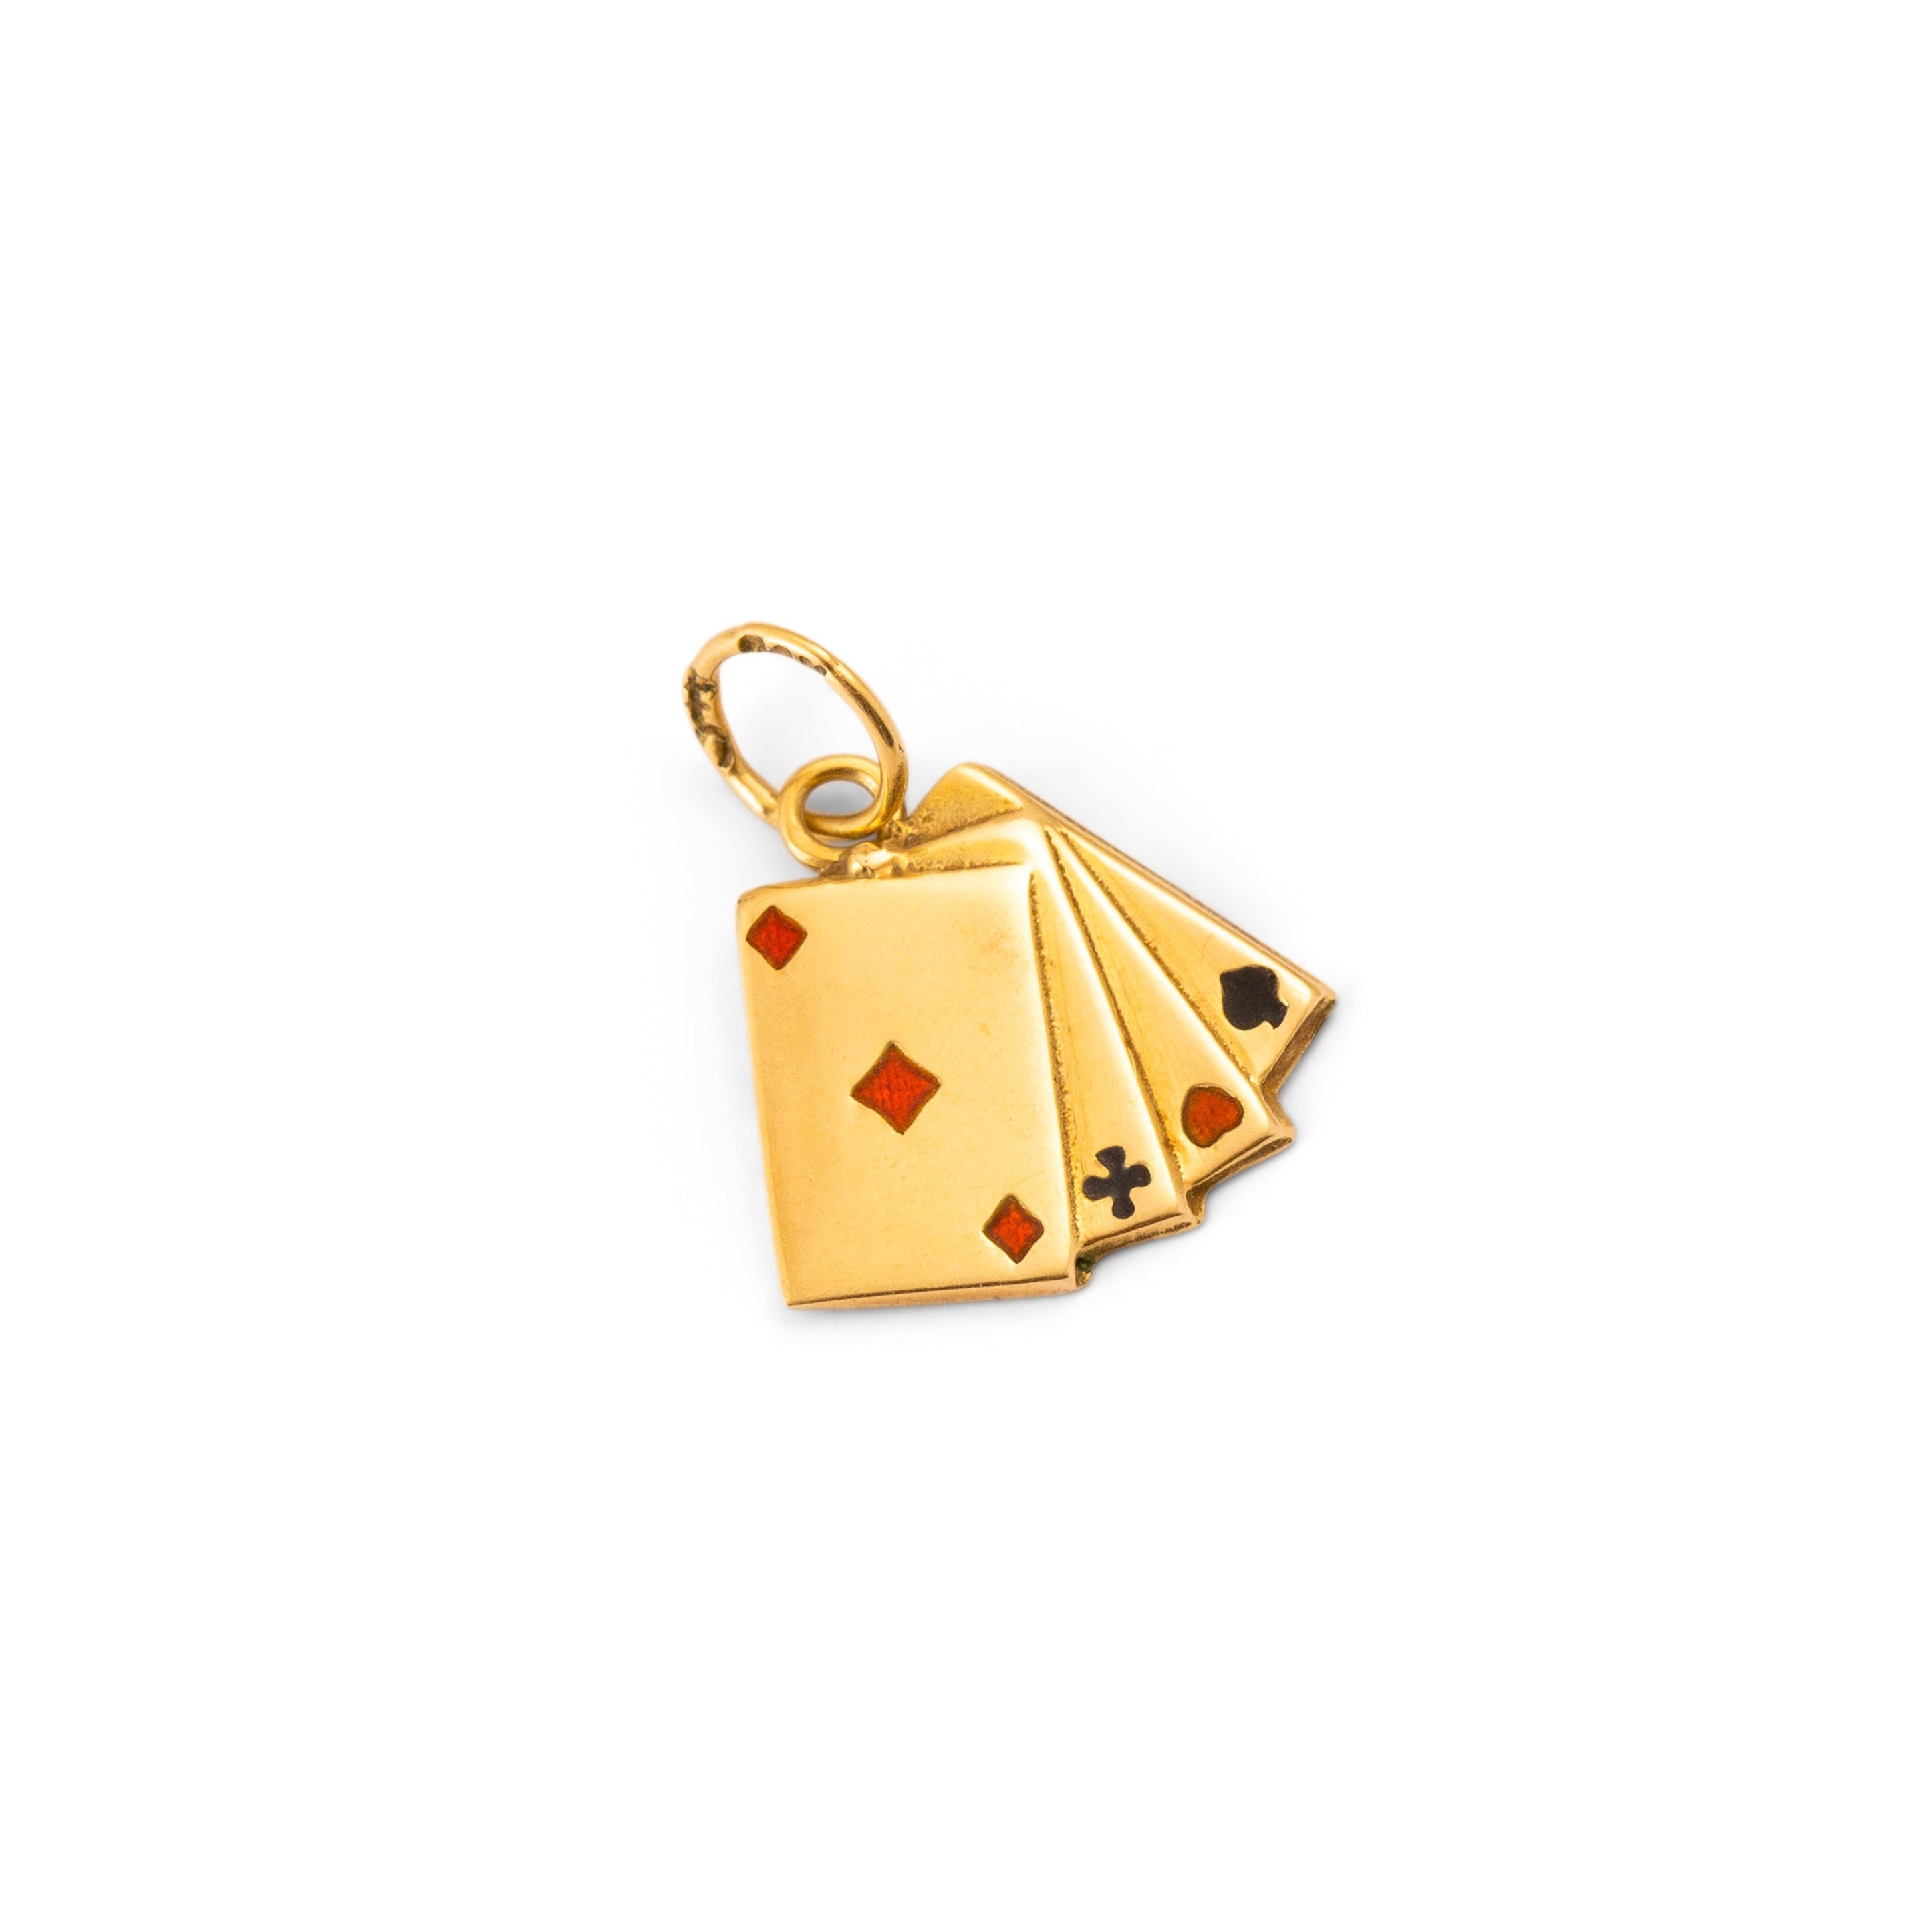 Four Aces Enamel and 14k Gold Card Charm